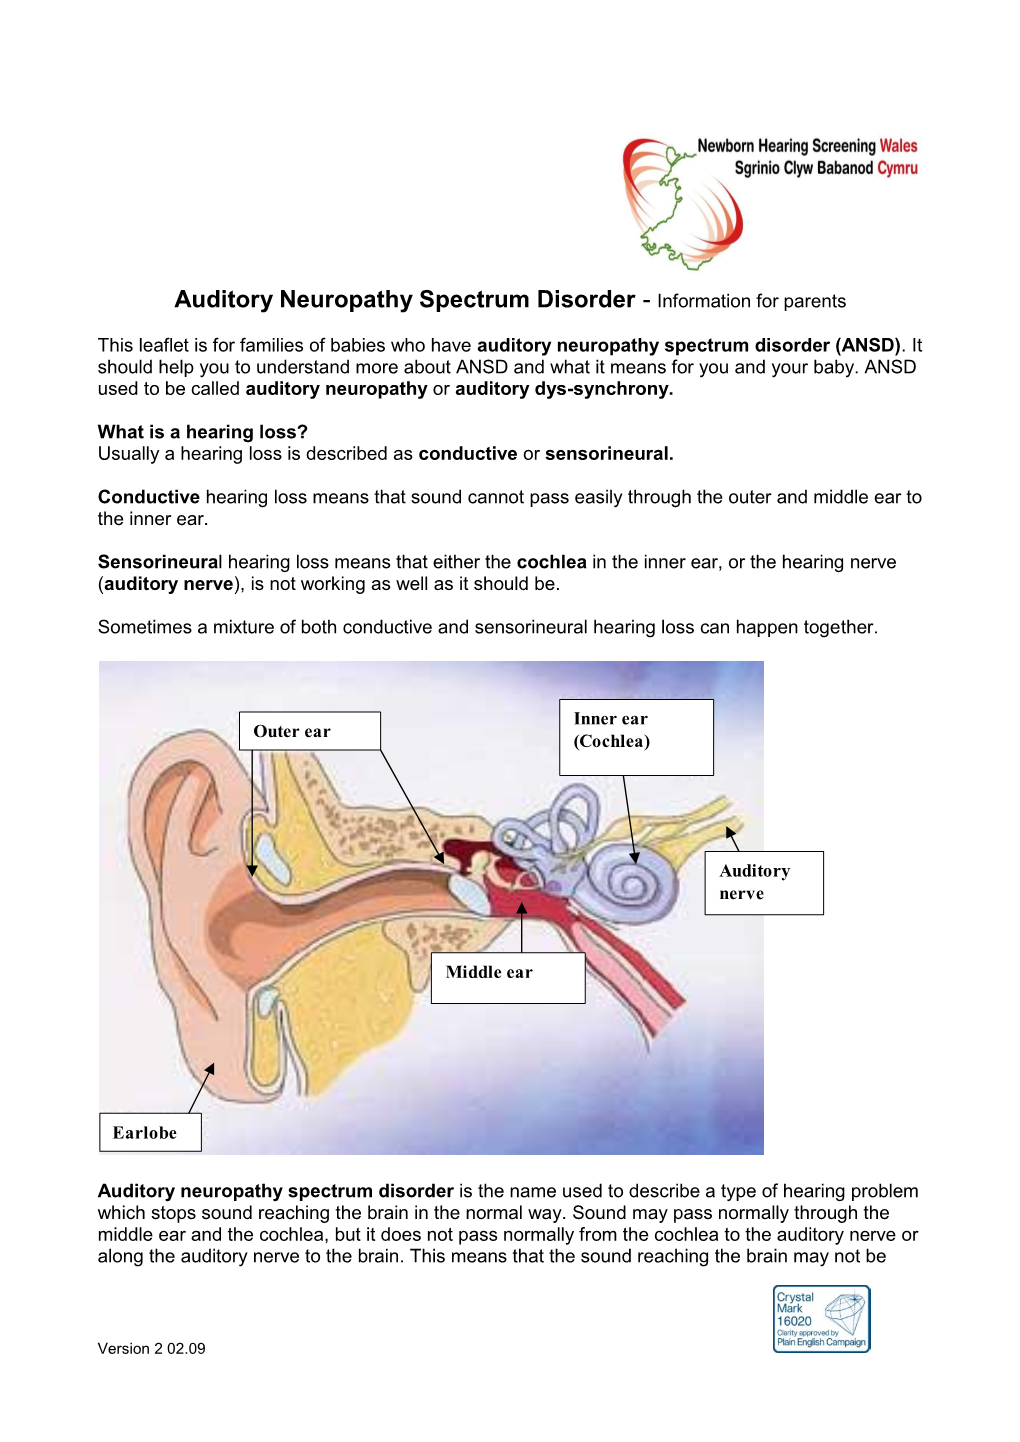 Auditory Neuropathy Spectrum Disorder - Information for Parents